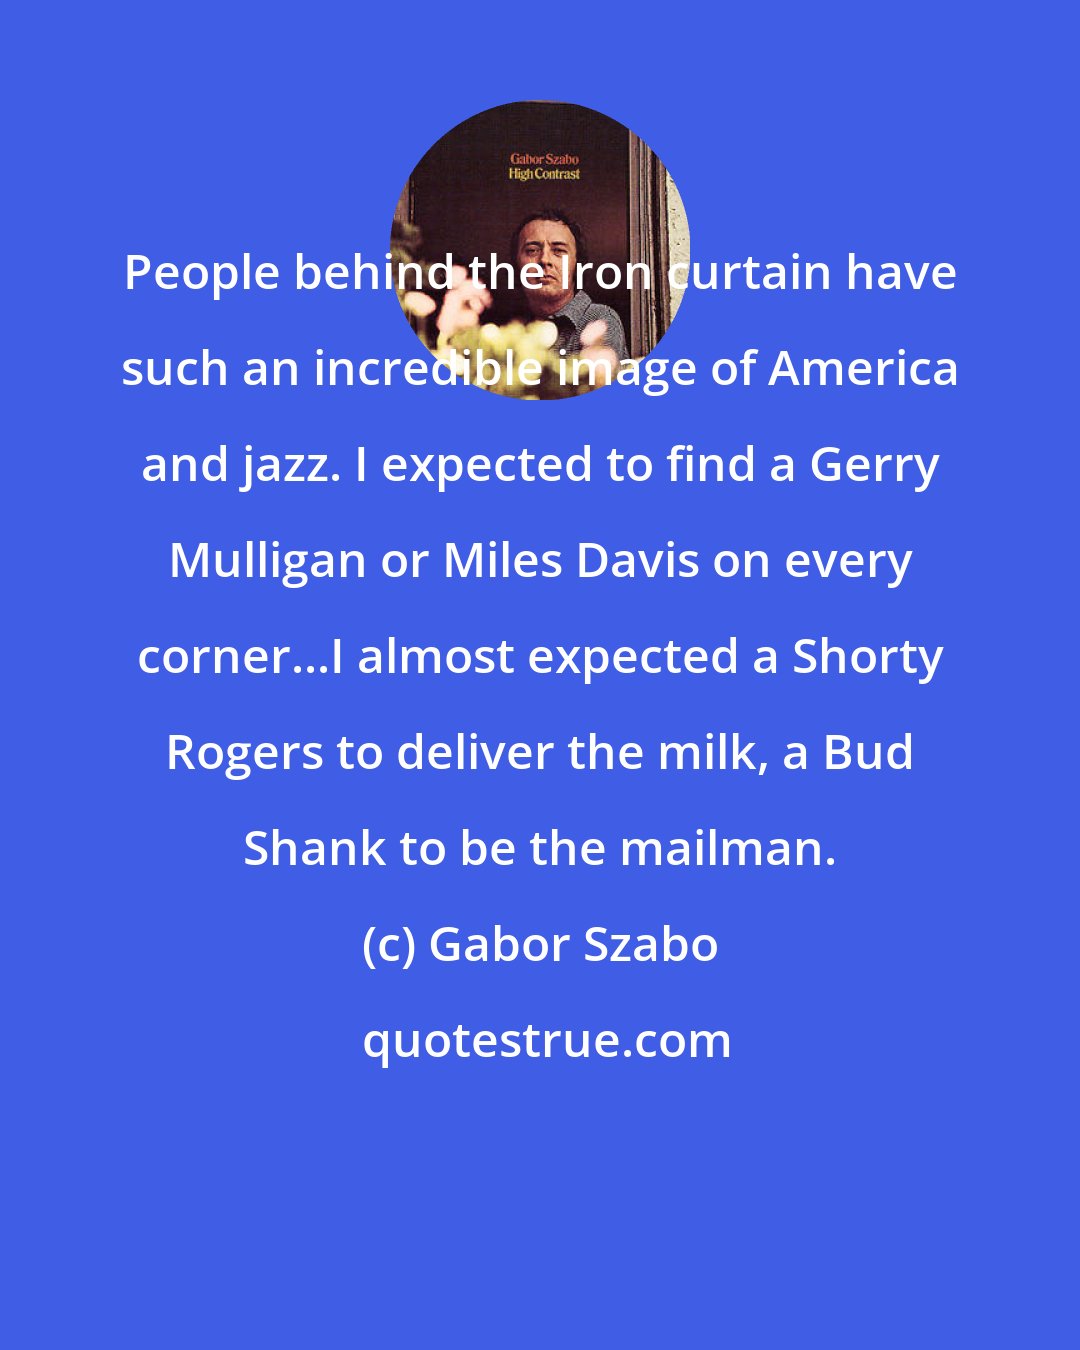 Gabor Szabo: People behind the Iron curtain have such an incredible image of America and jazz. I expected to find a Gerry Mulligan or Miles Davis on every corner...I almost expected a Shorty Rogers to deliver the milk, a Bud Shank to be the mailman.